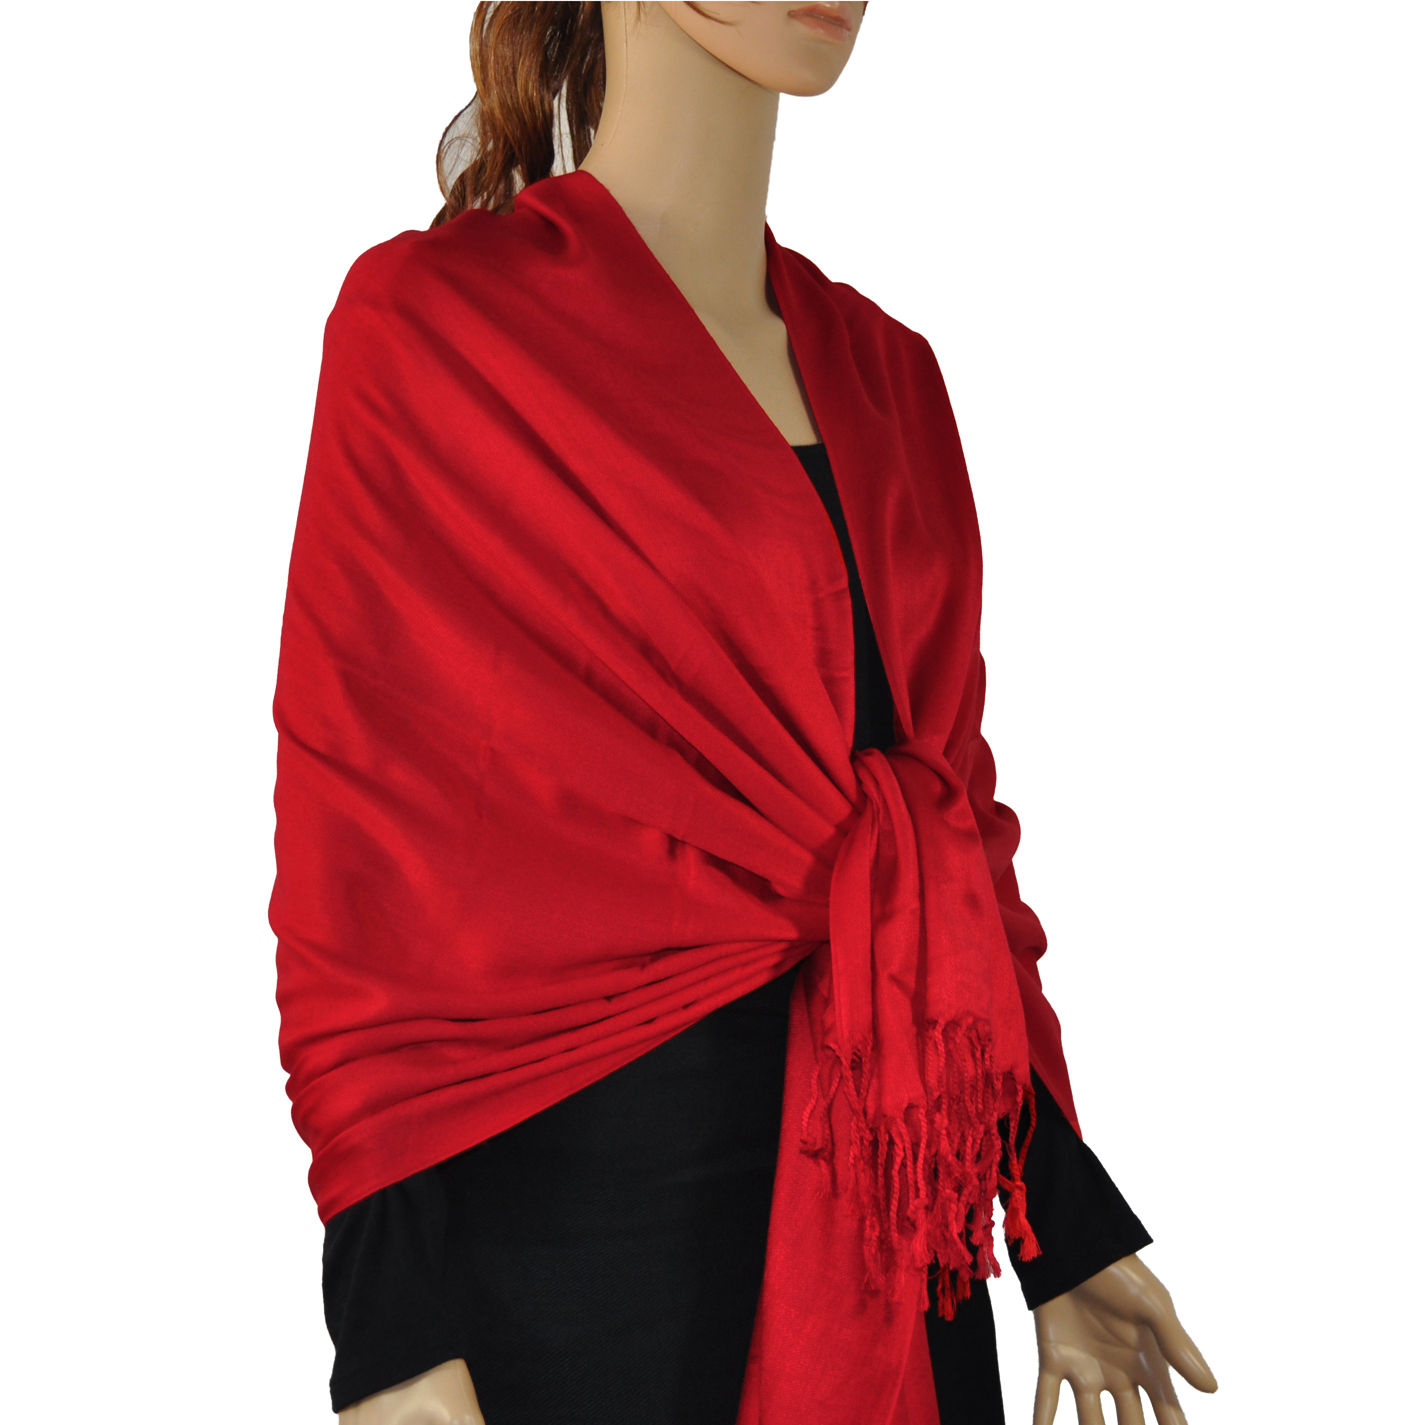 Satin Solid Pashmina Red - Wholesale Scarves City